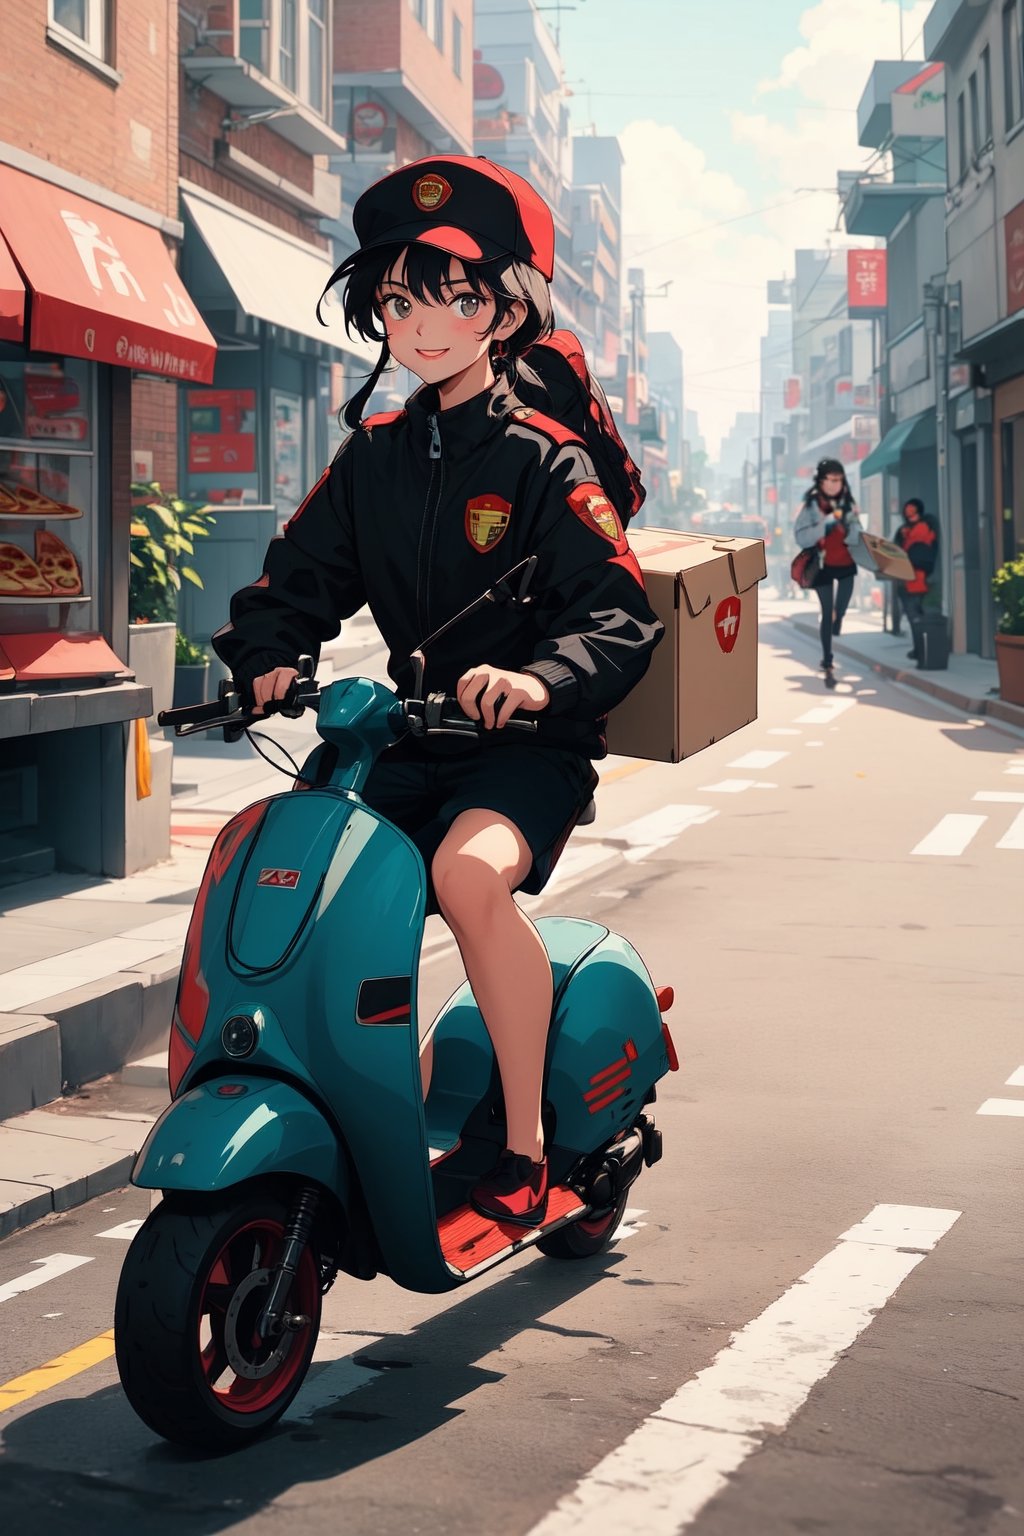 A young woman in a pizza delivery uniform, riding a scooter down a city street. She is carrying a large pizza box in her hand and is smiling at the people she passes. The scooter is bright red and has the pizza delivery company's logo on it. The city street is busy and bustling, but the pizza delivery girl is navigating it with ease. She is clearly enjoying her job and is proud to be delivering delicious pizzas to her customers.